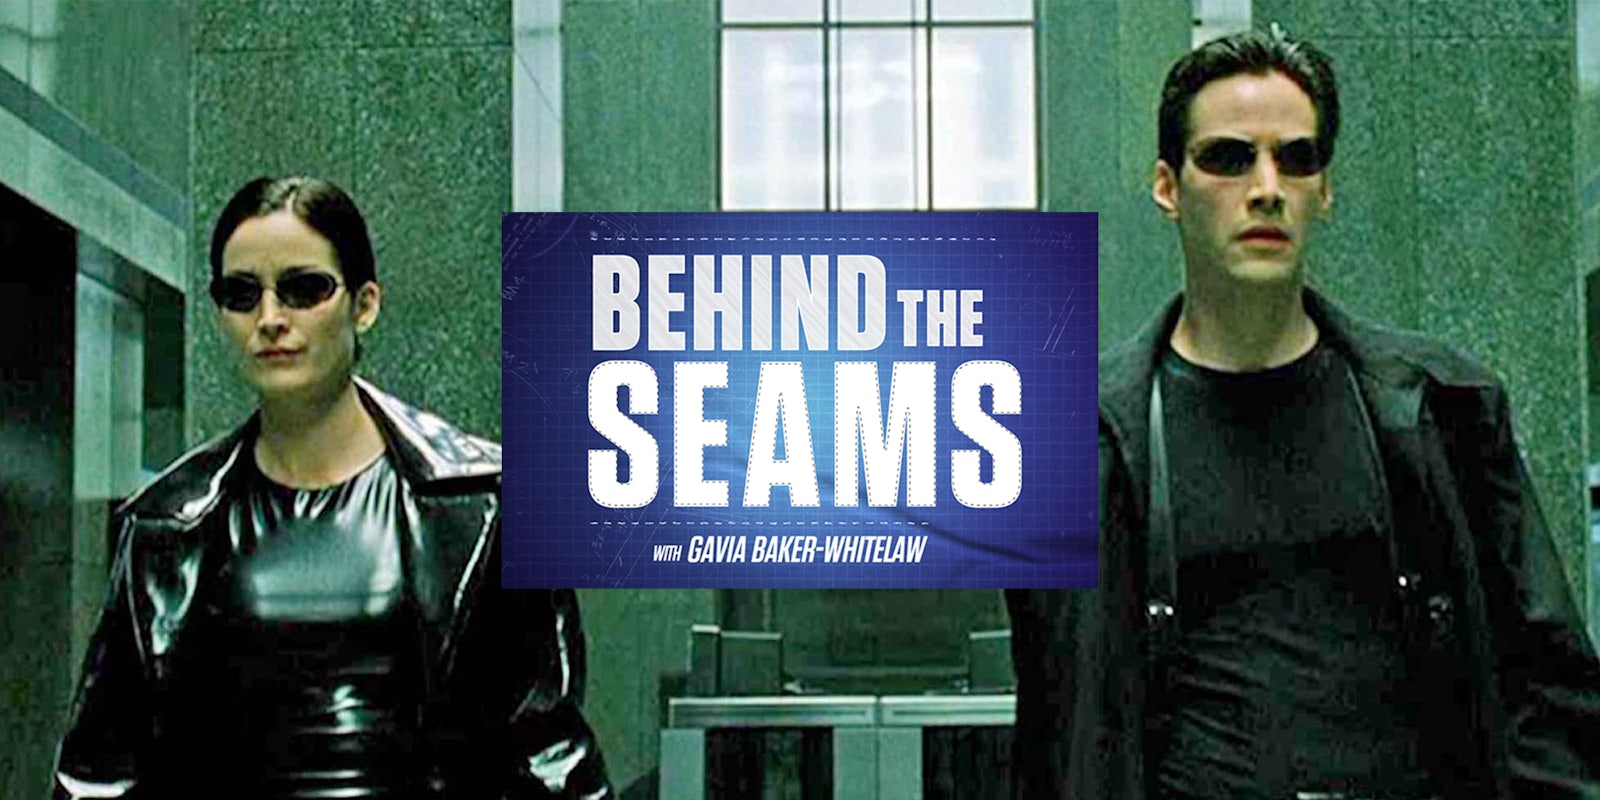 Trinity and Neo from The Matrix with 'Behind the Seams with Gavia Baker-Whitelaw' logo